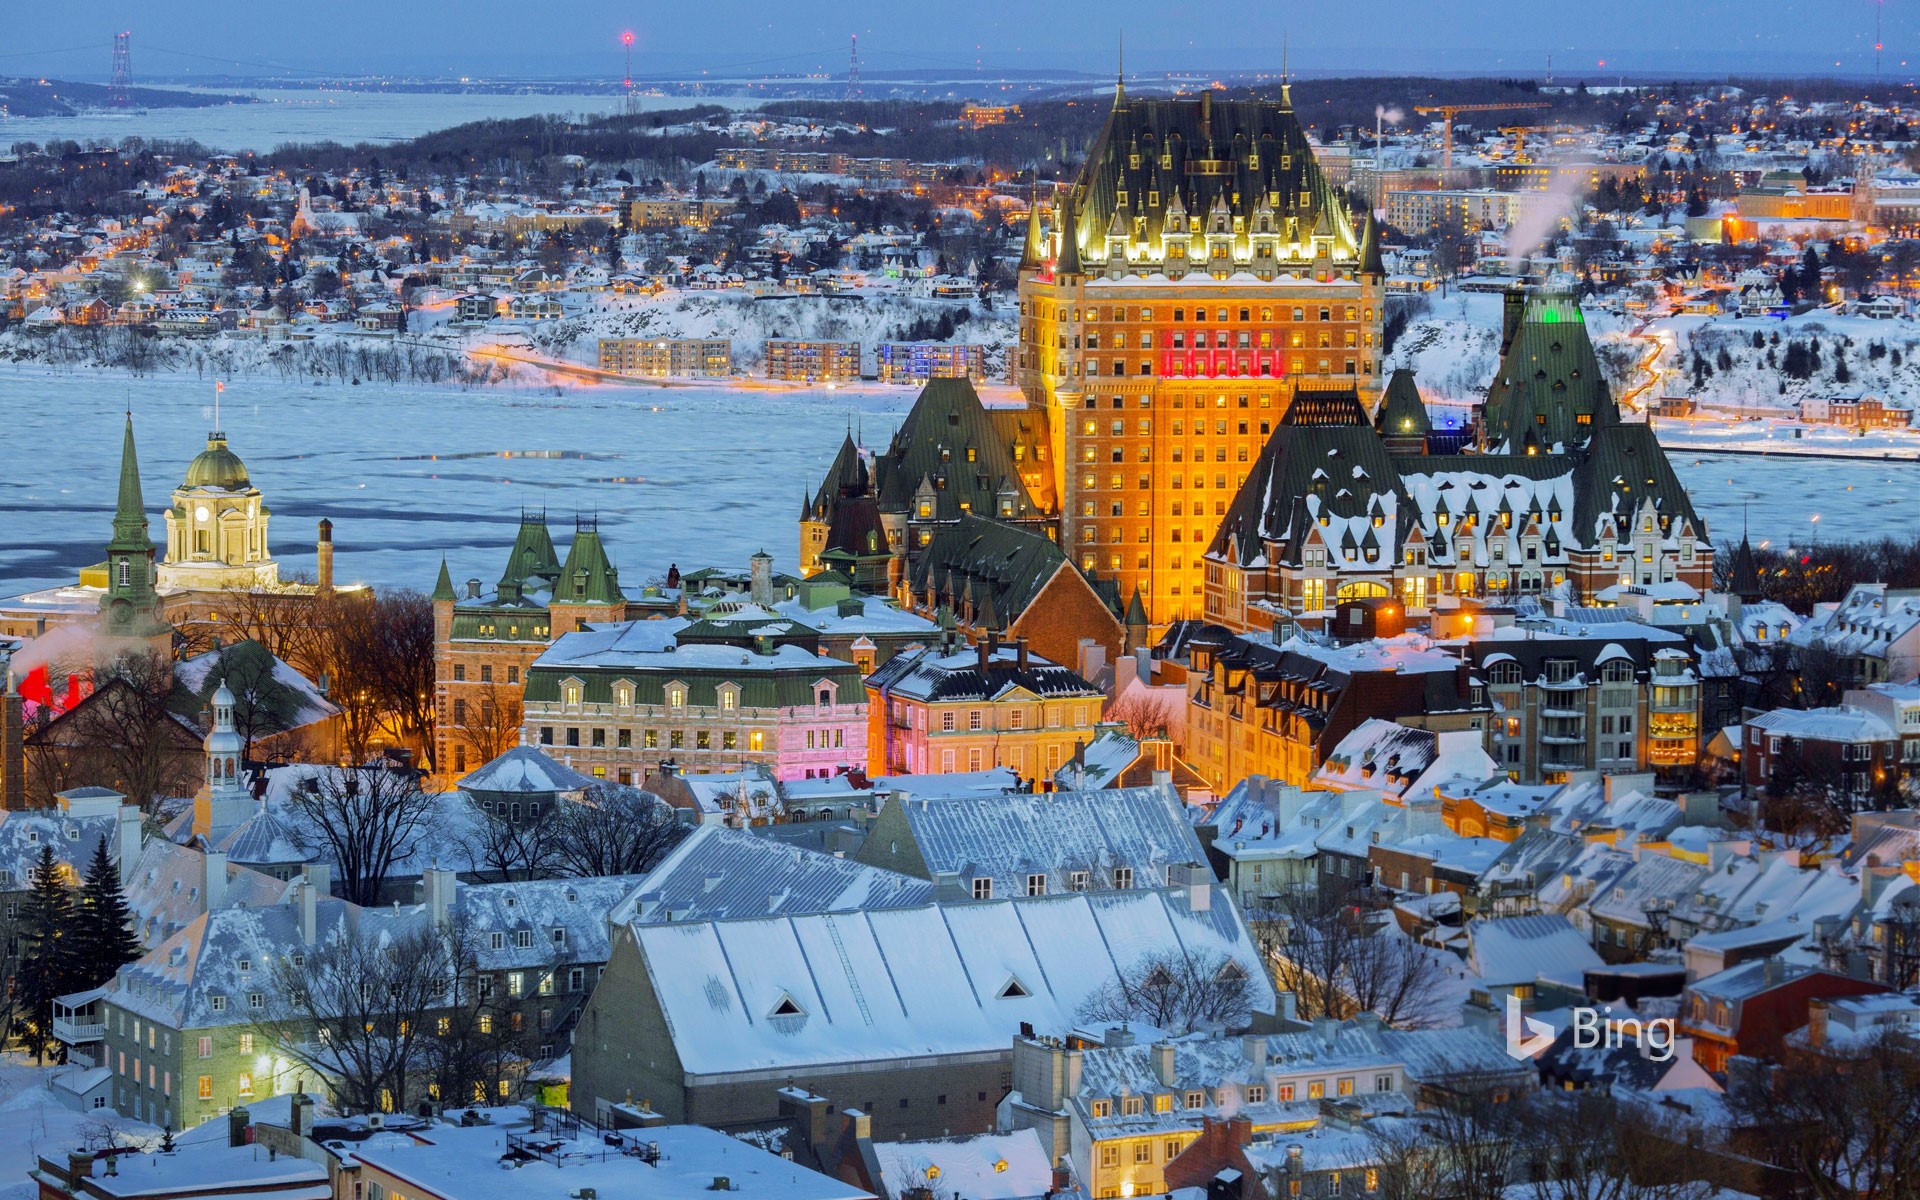 View of the Old City in Quebec City, Canada